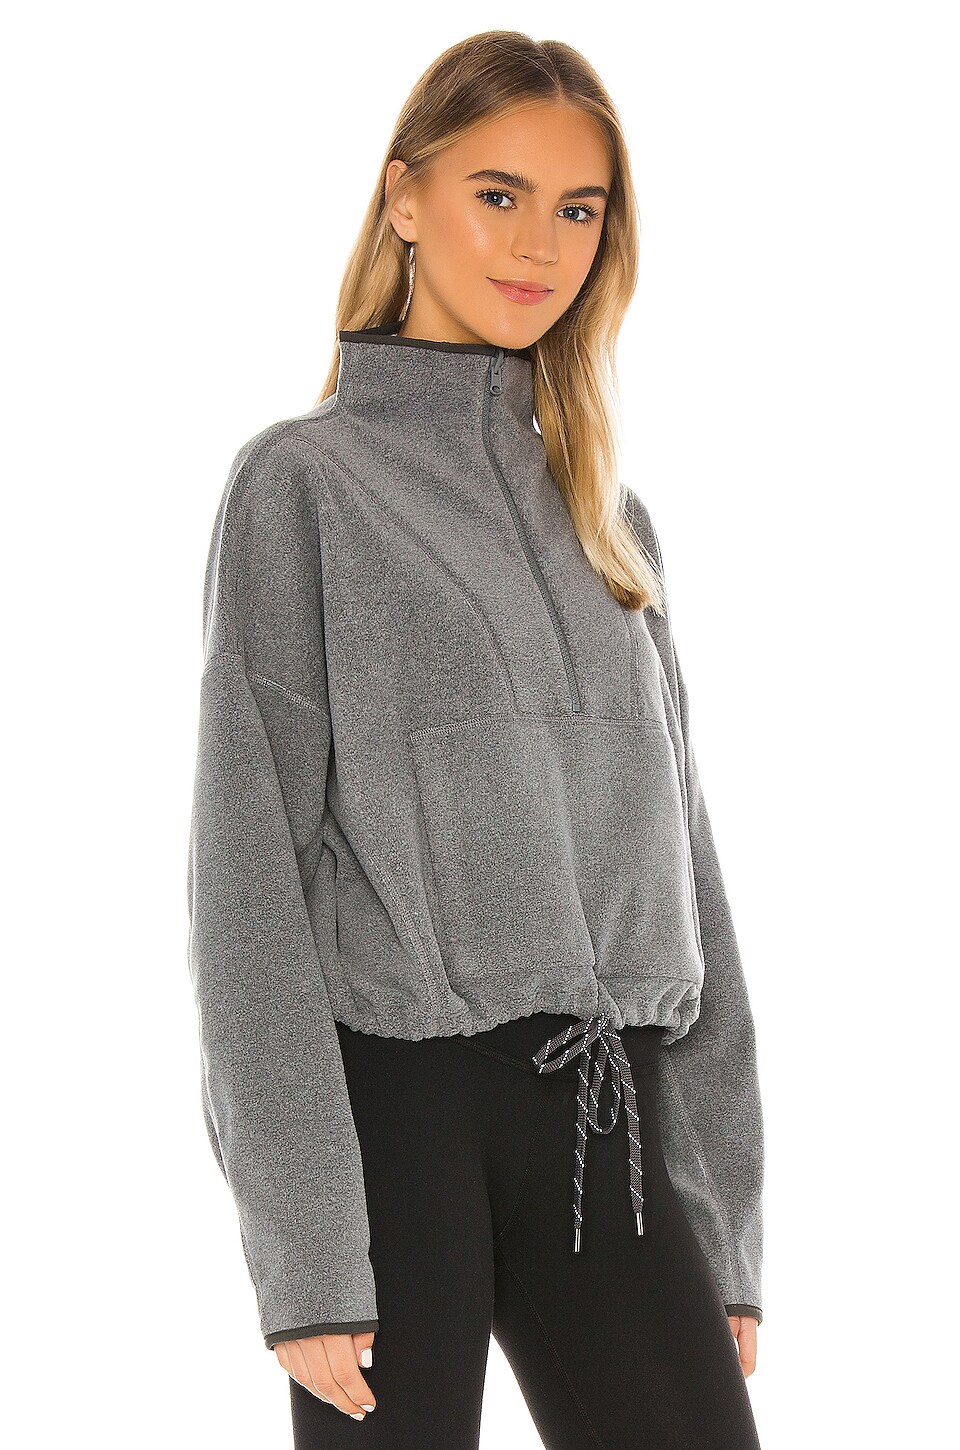 alo Yin Yang Reversible Half Zip Pullover in Anthracite Heather | REVOLVE